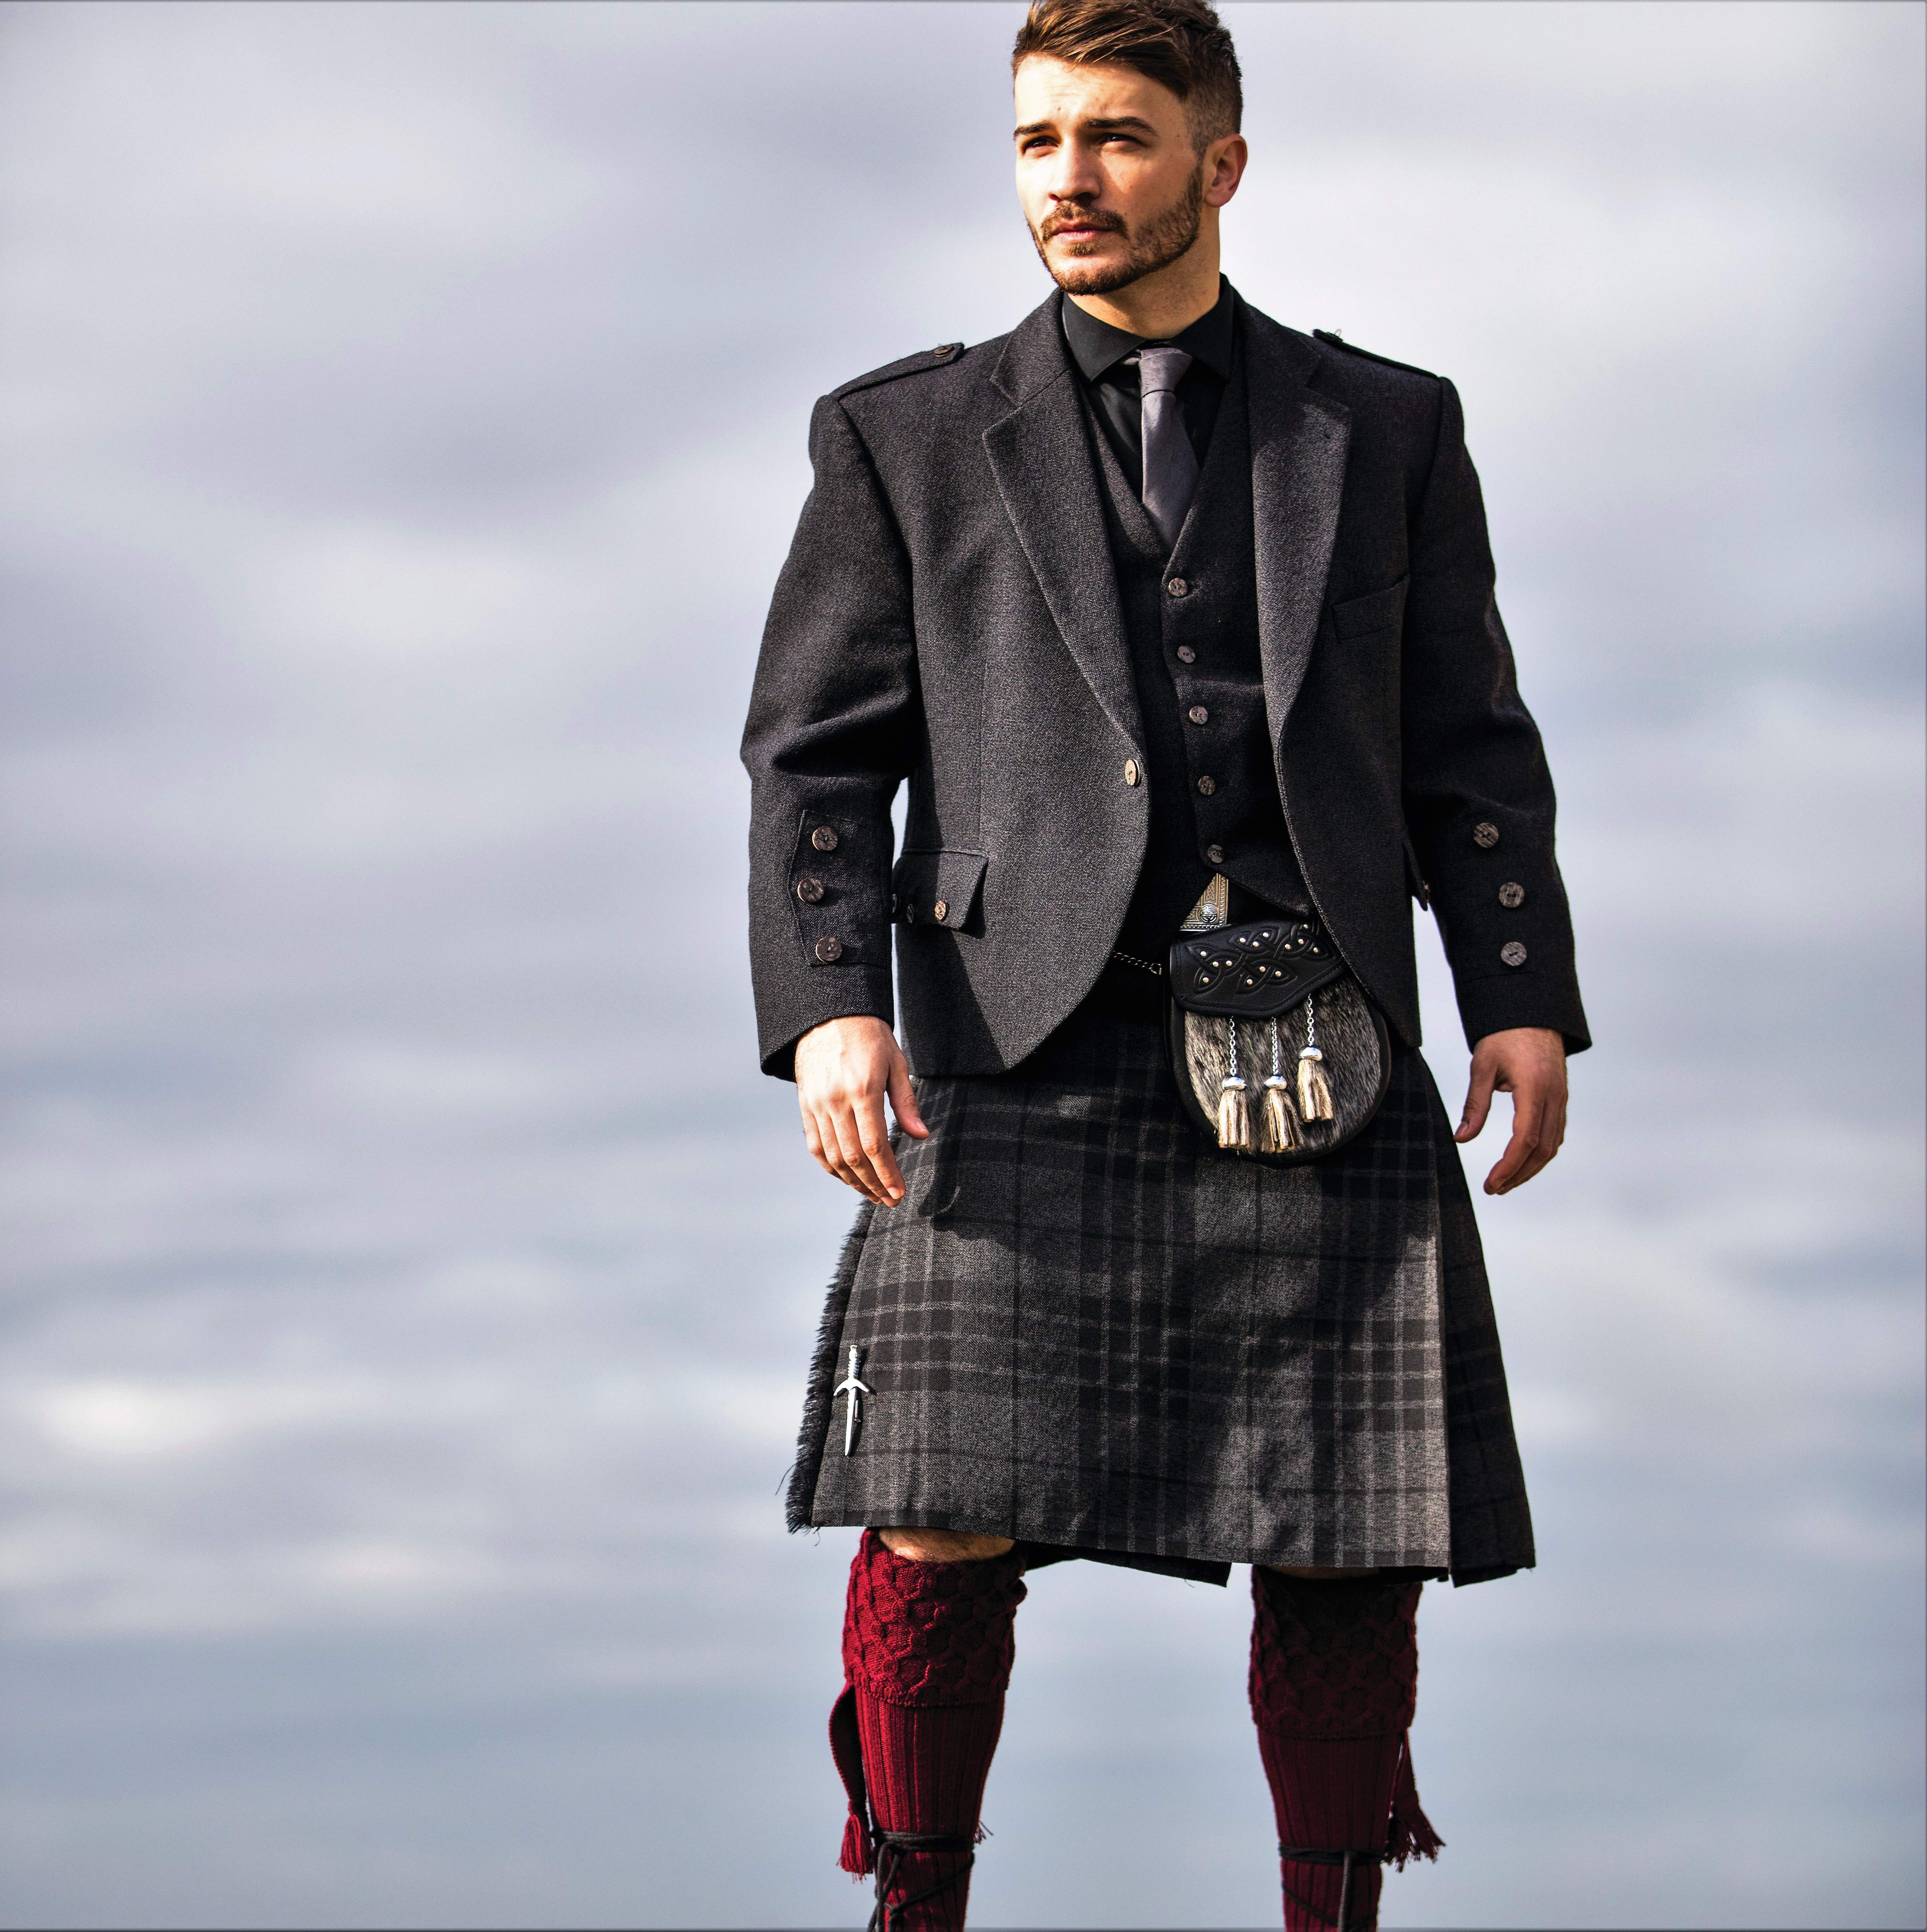 Top ten things you should know about kilts!